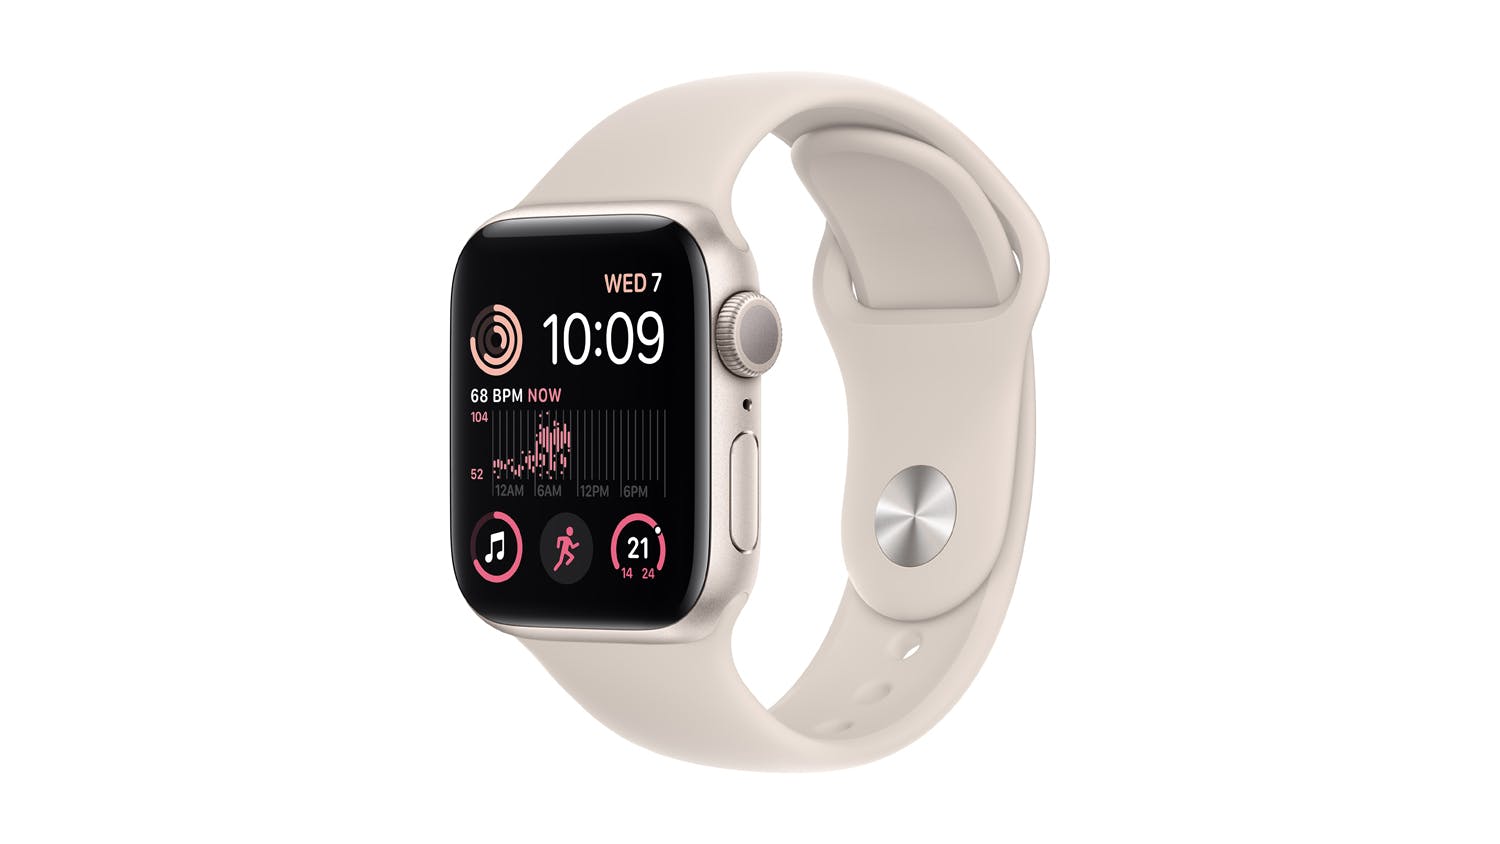 Louis Vuitton takes on Apple with smartwatch - NZ Herald